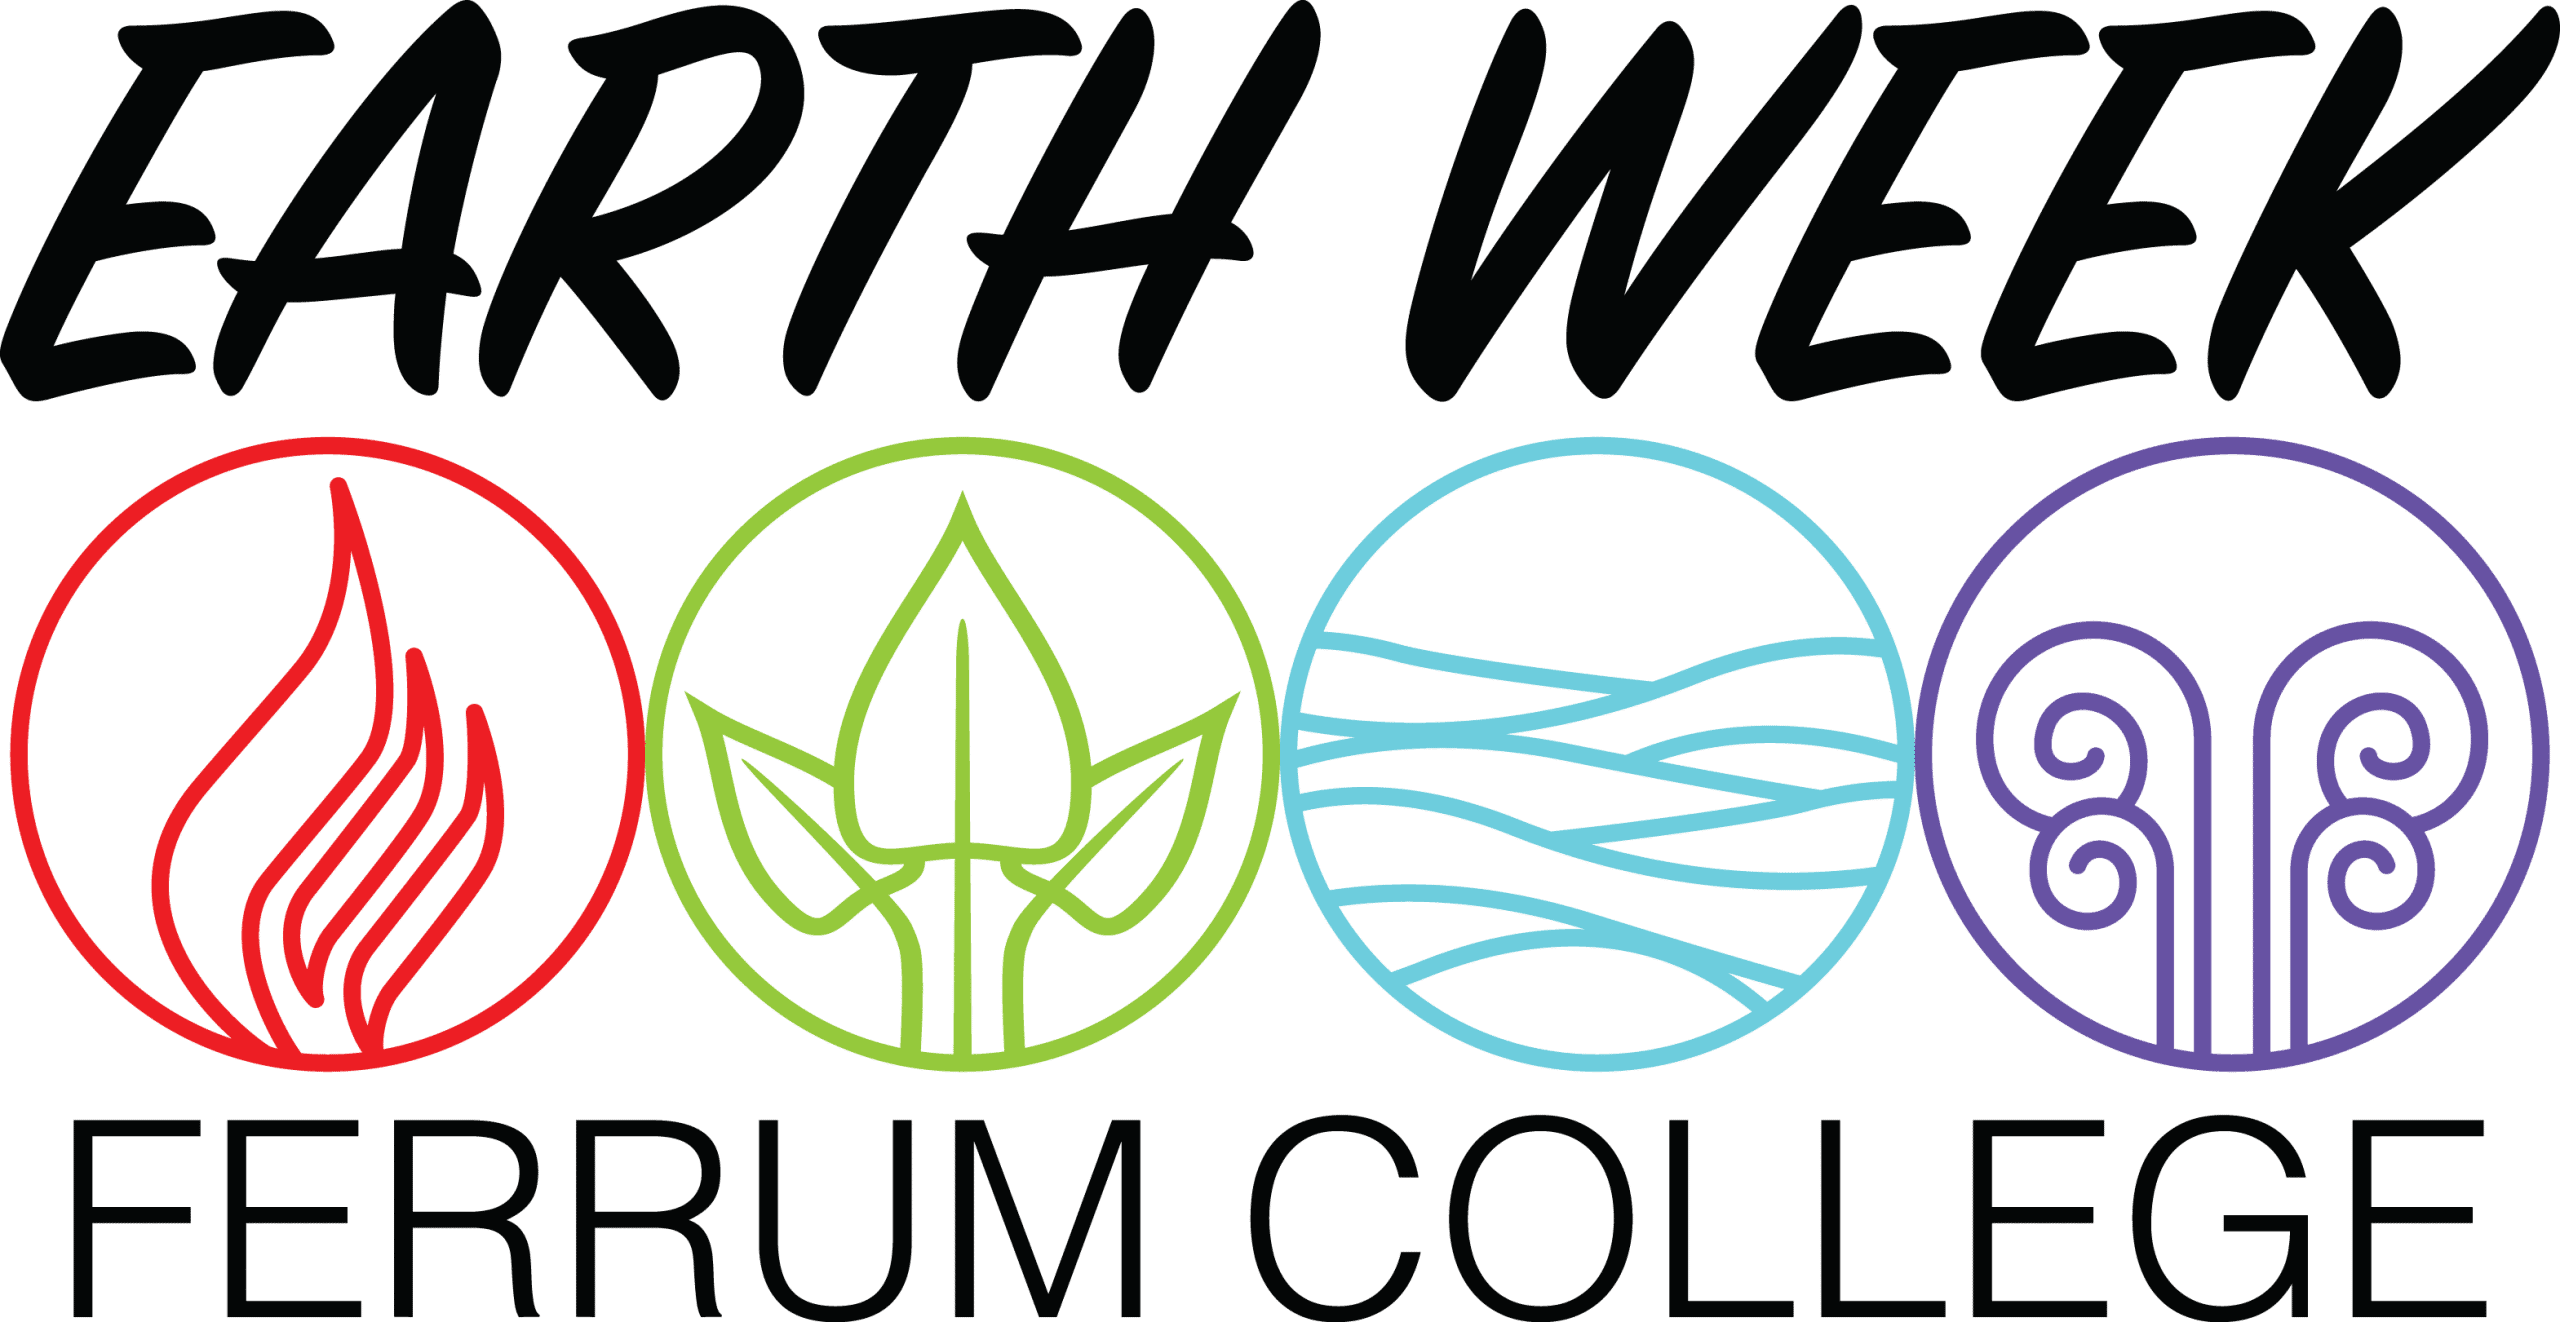 Dozens Of Events Planned April 23 28 For Earth Week Ferrum College